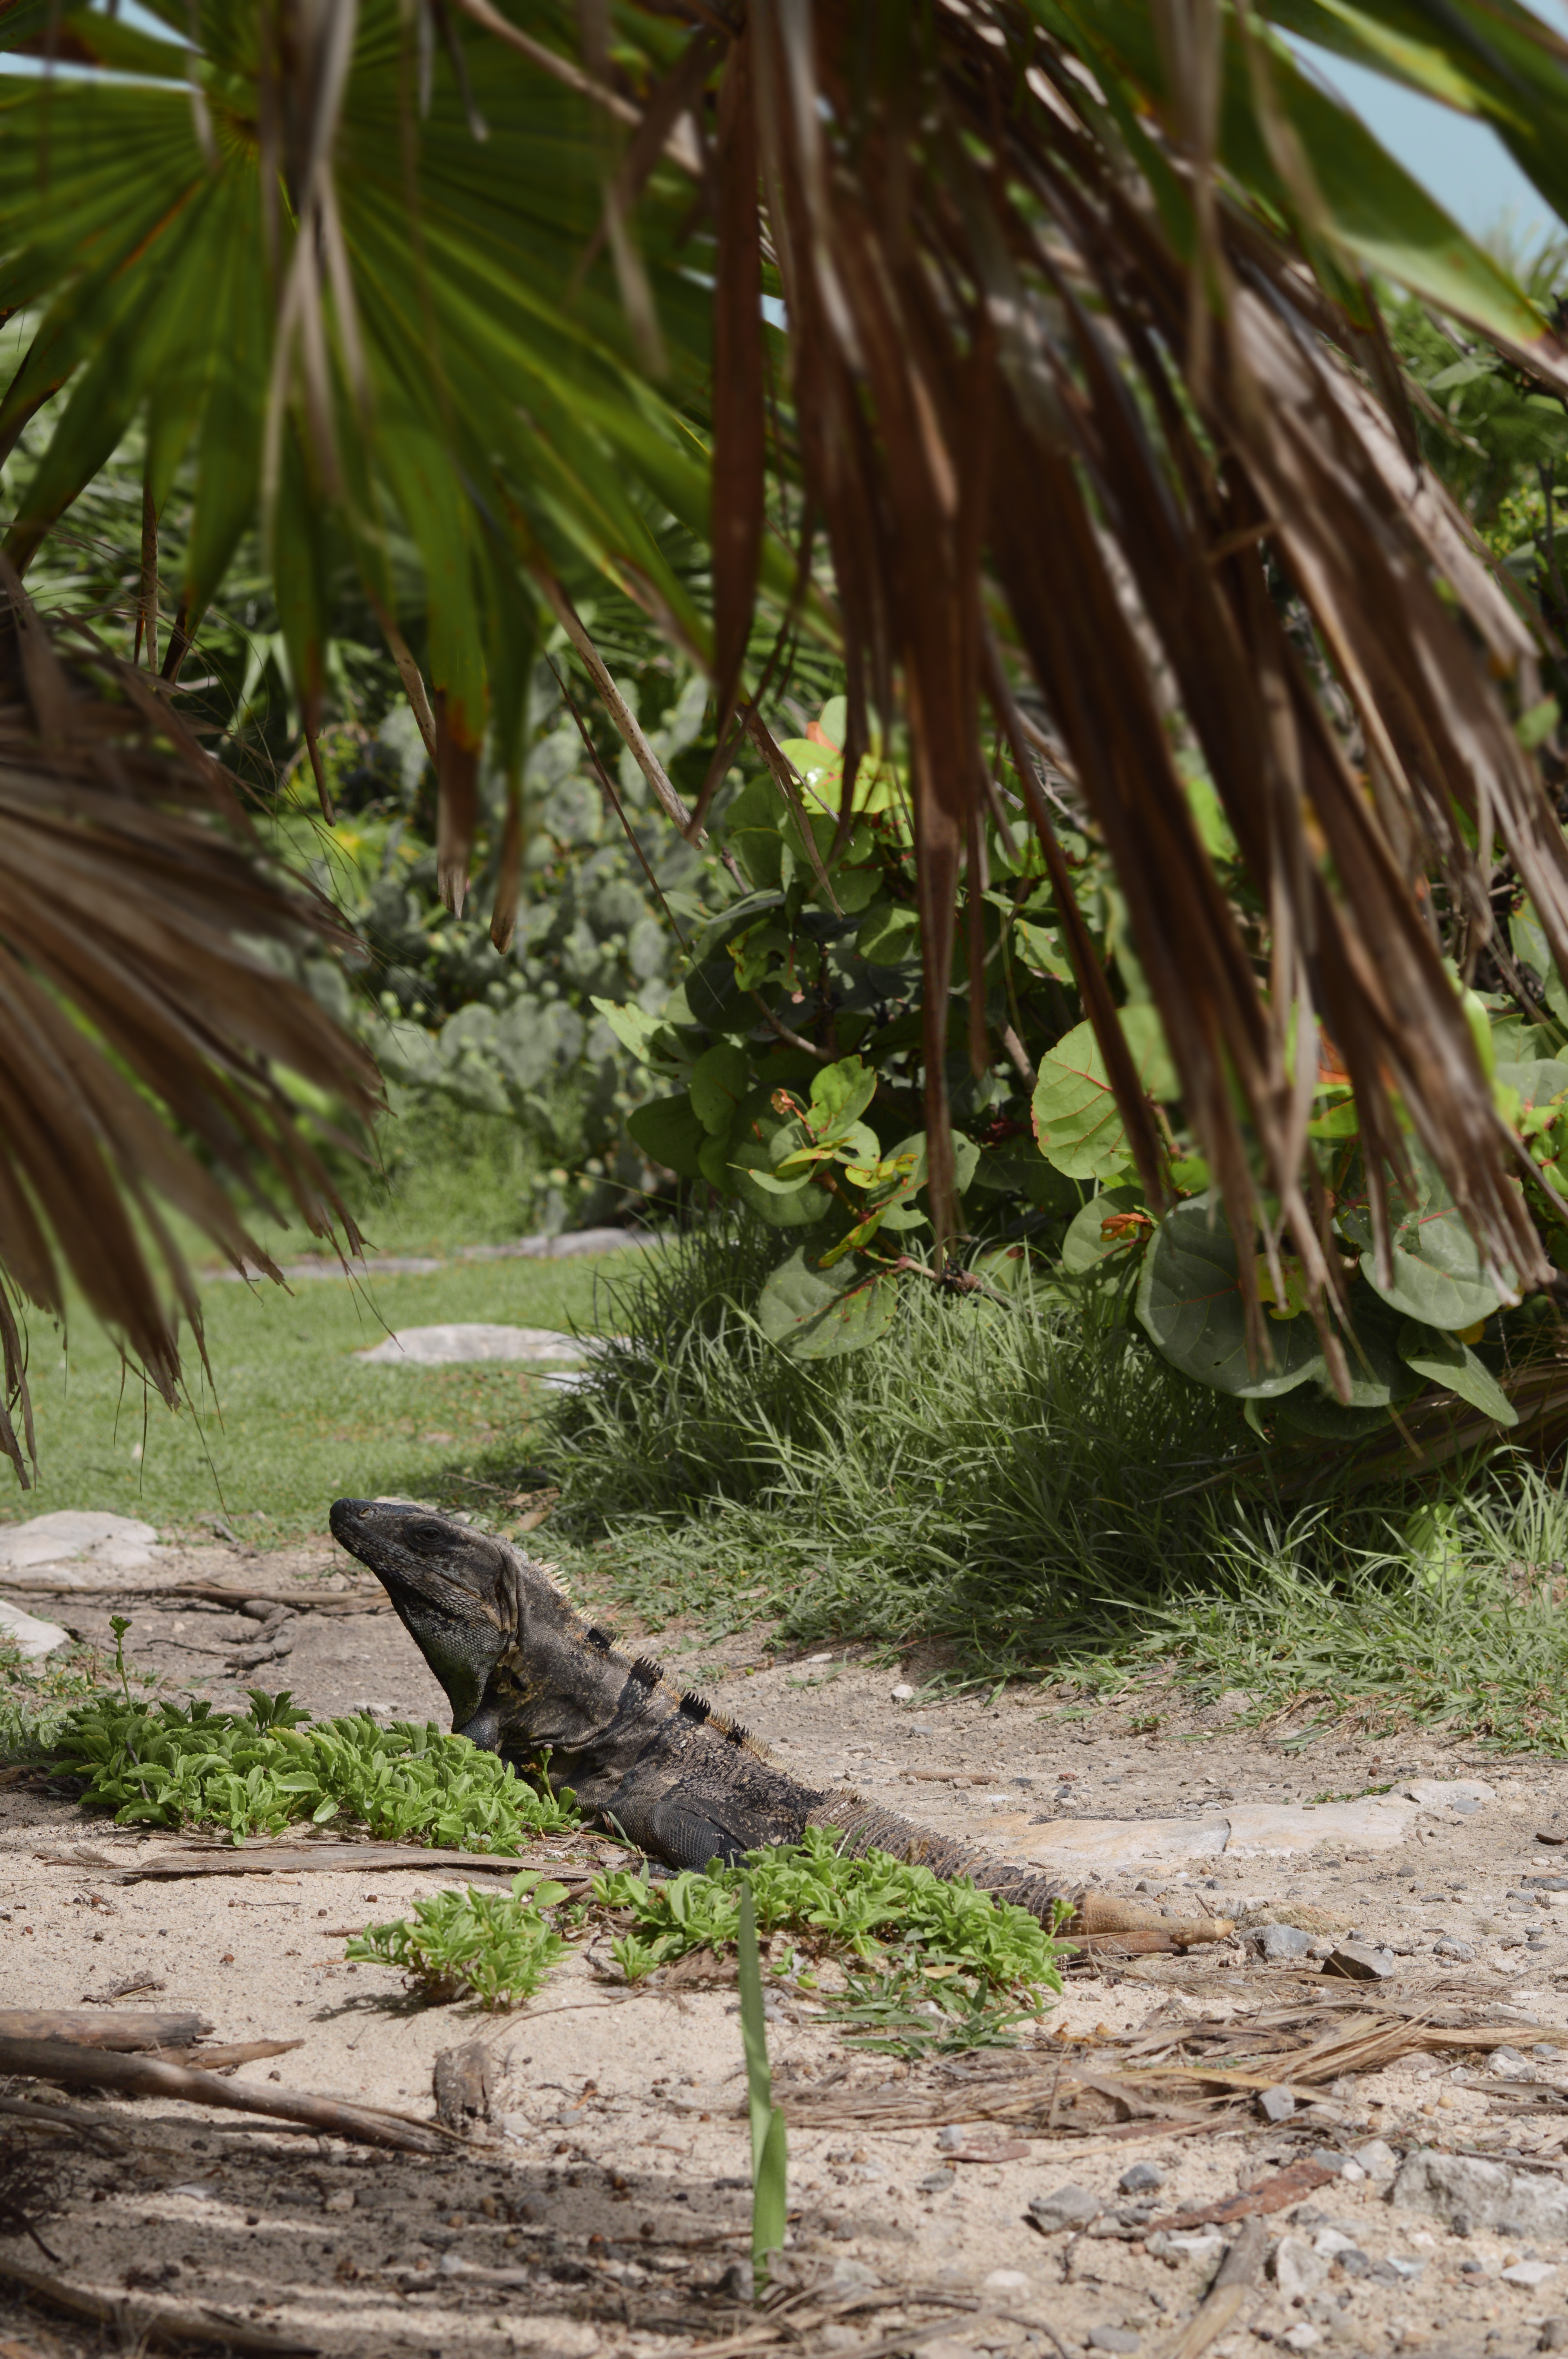 An iguana at the ruins in Tulum, Mexico